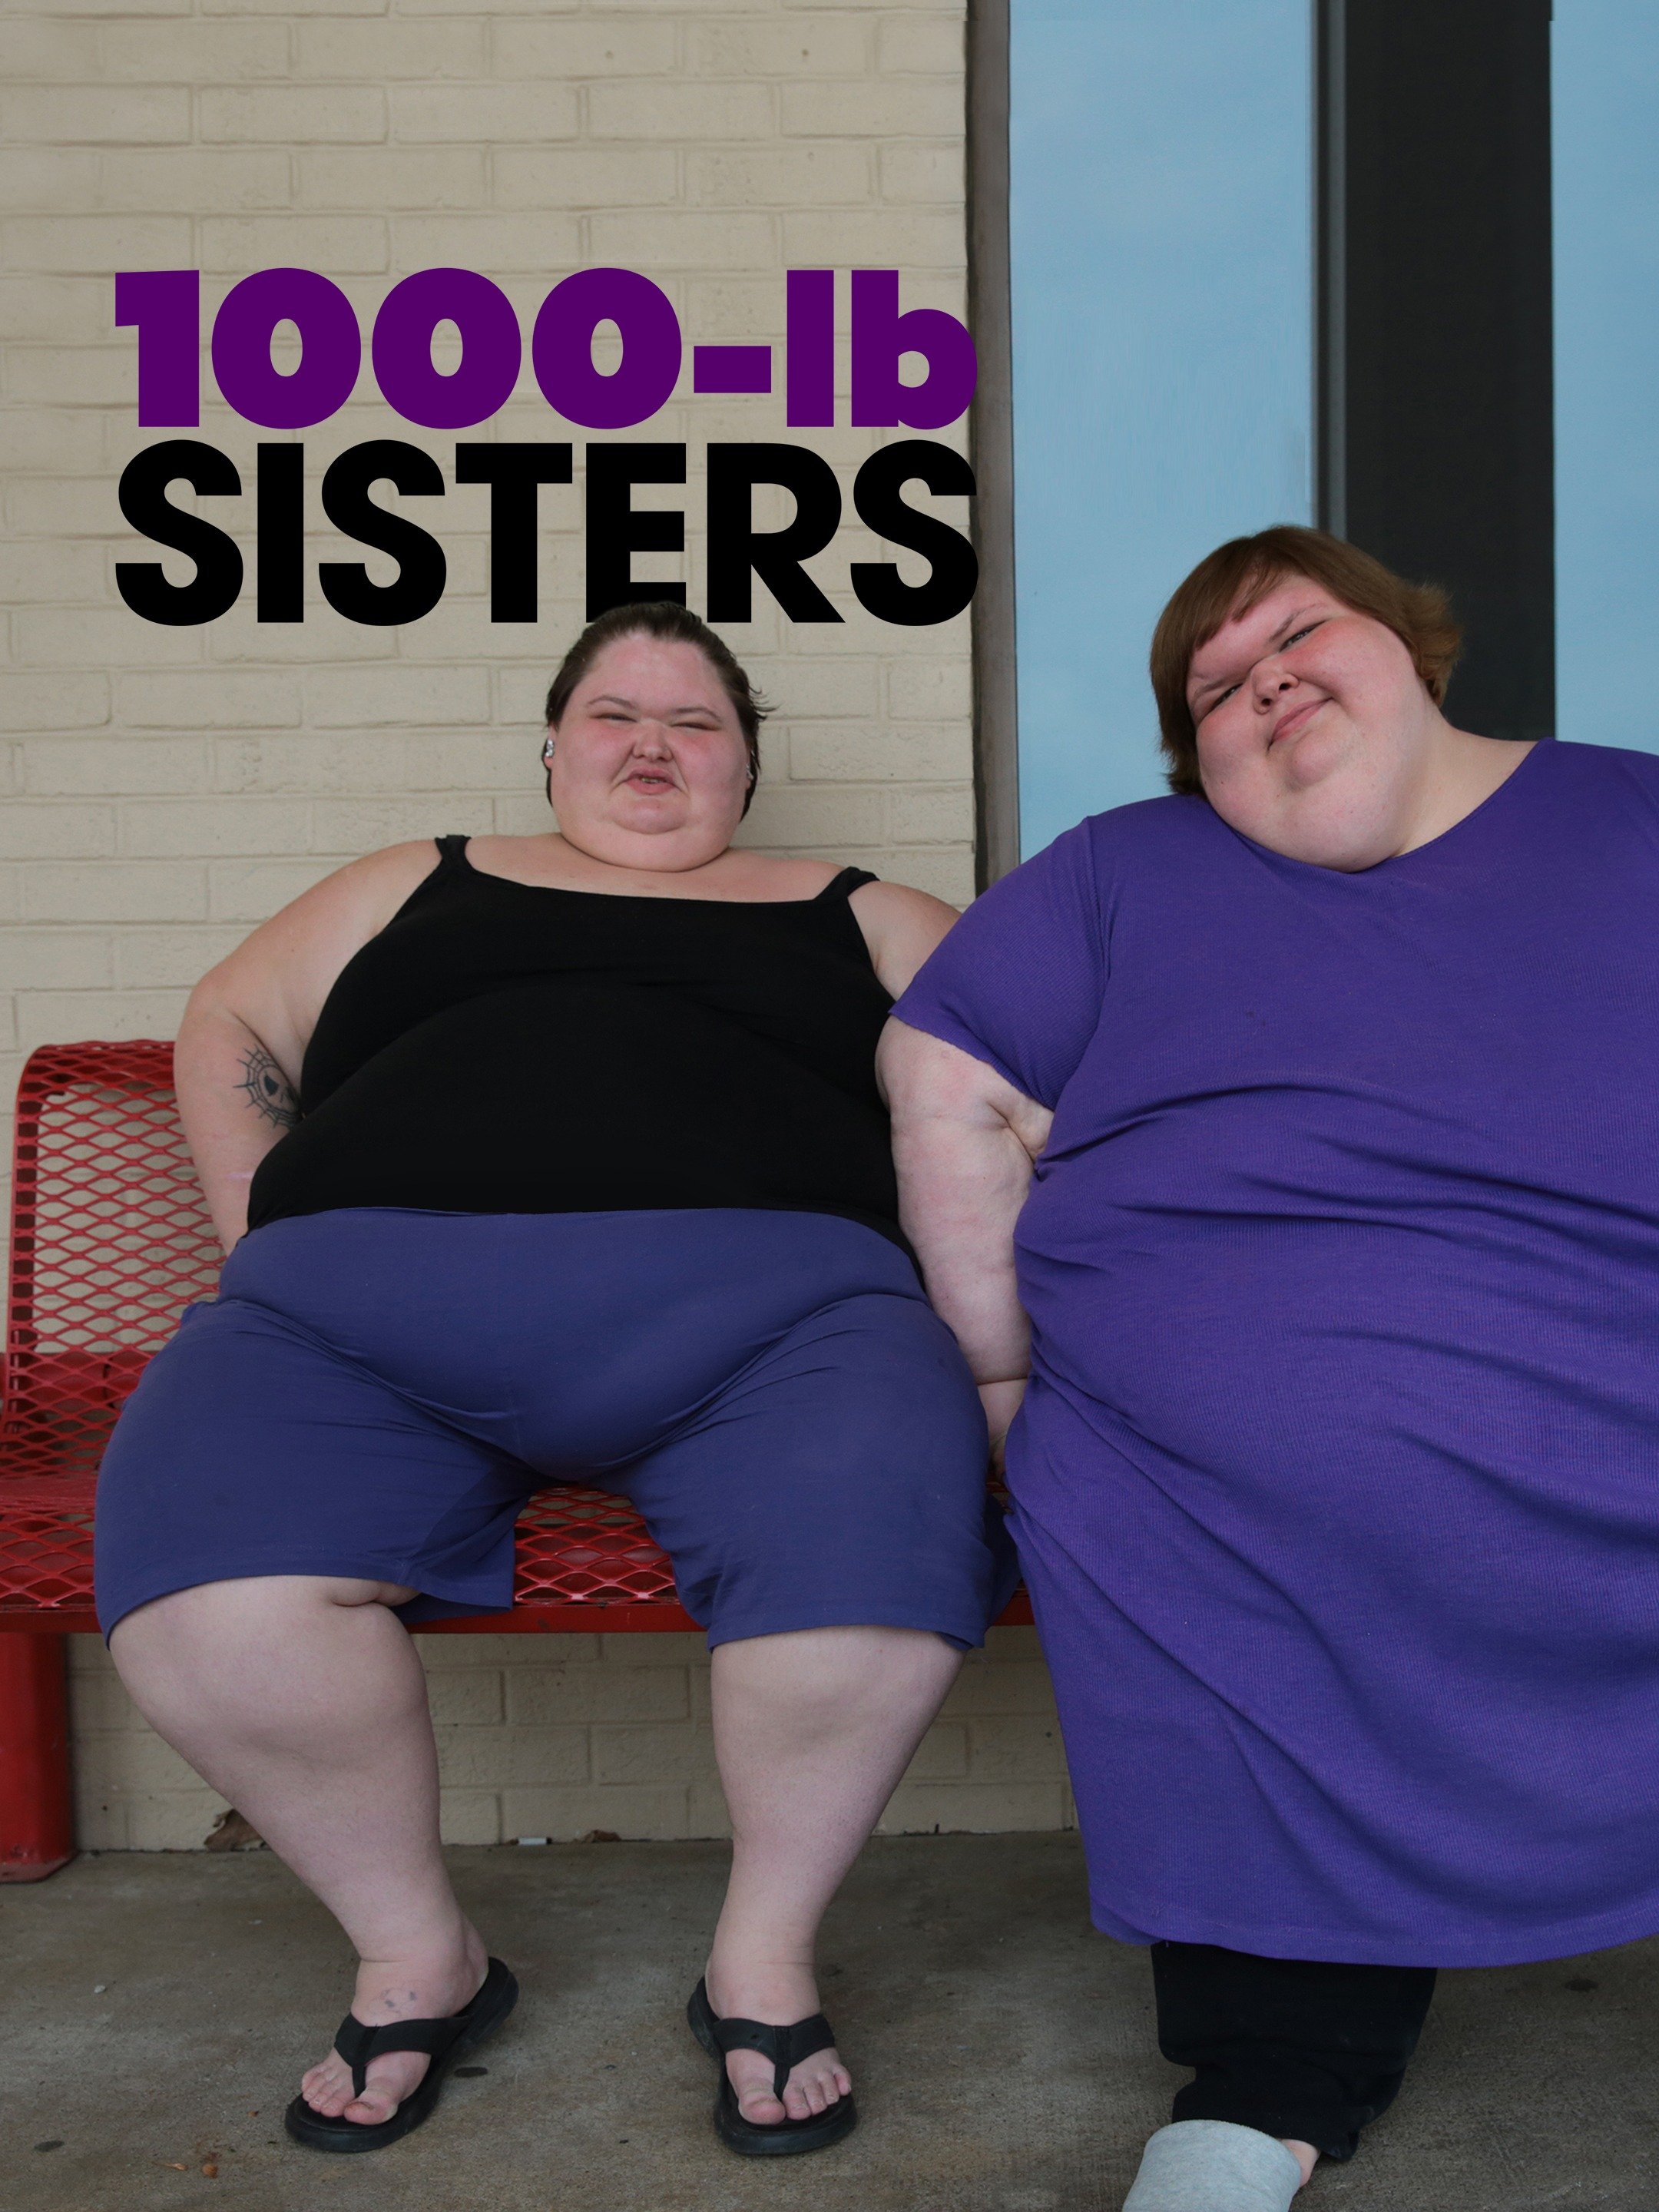 1000-Lb. Sisters - Rotten Tomatoes